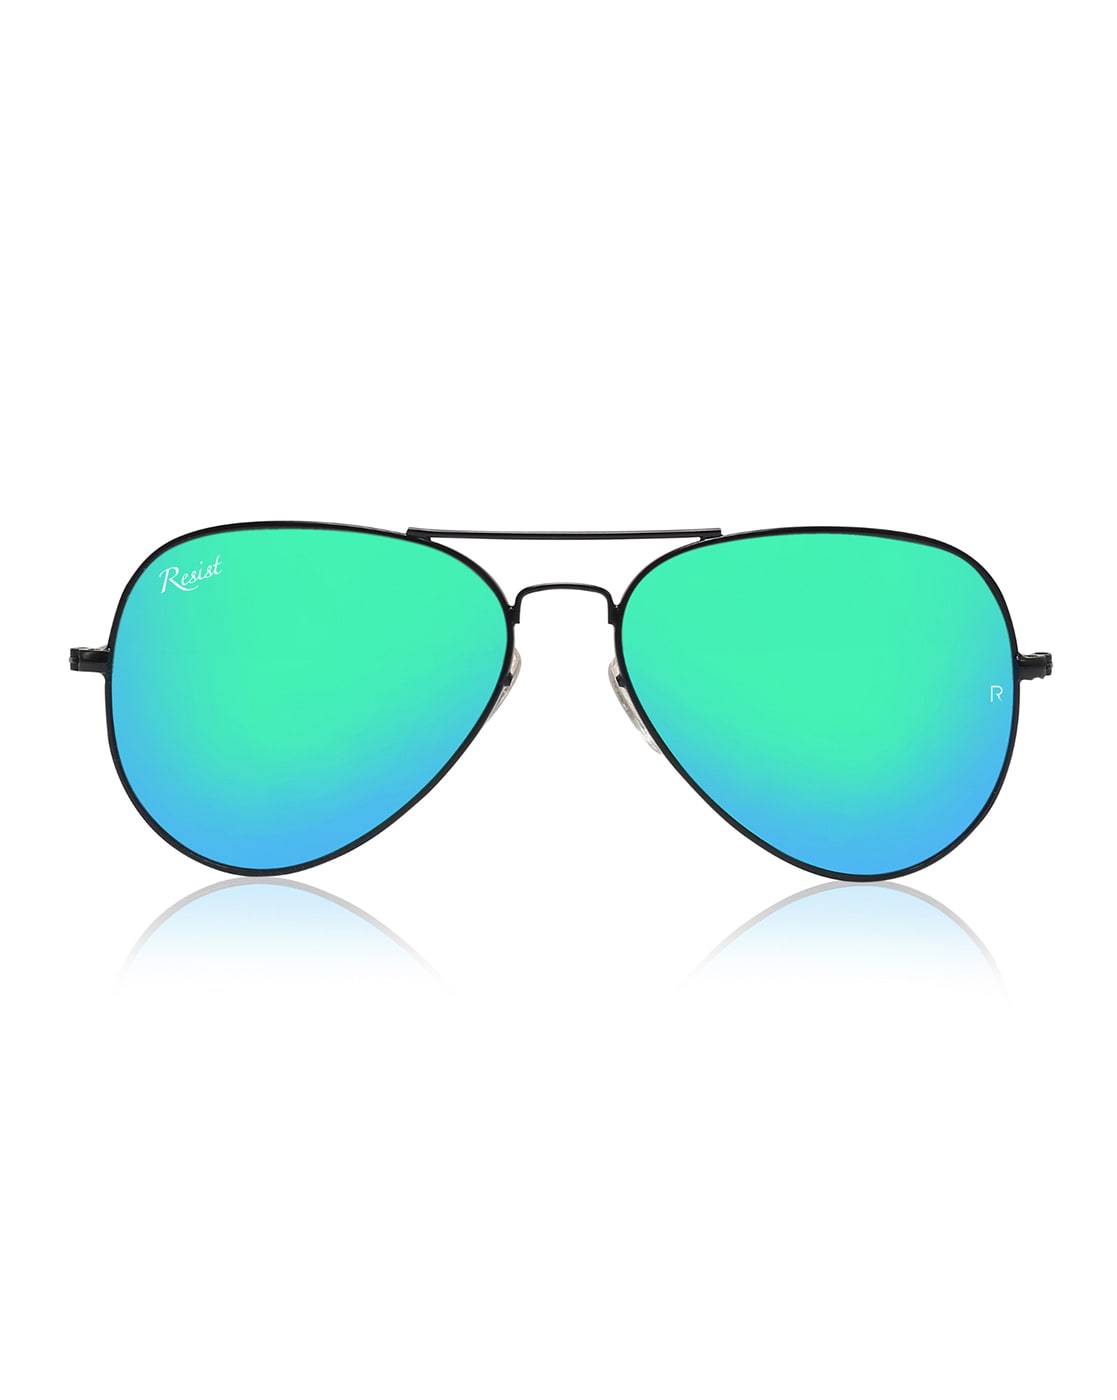 Mood Color Changing Sunglasses | Deluxe-bdsngoinhaviet.com.vn